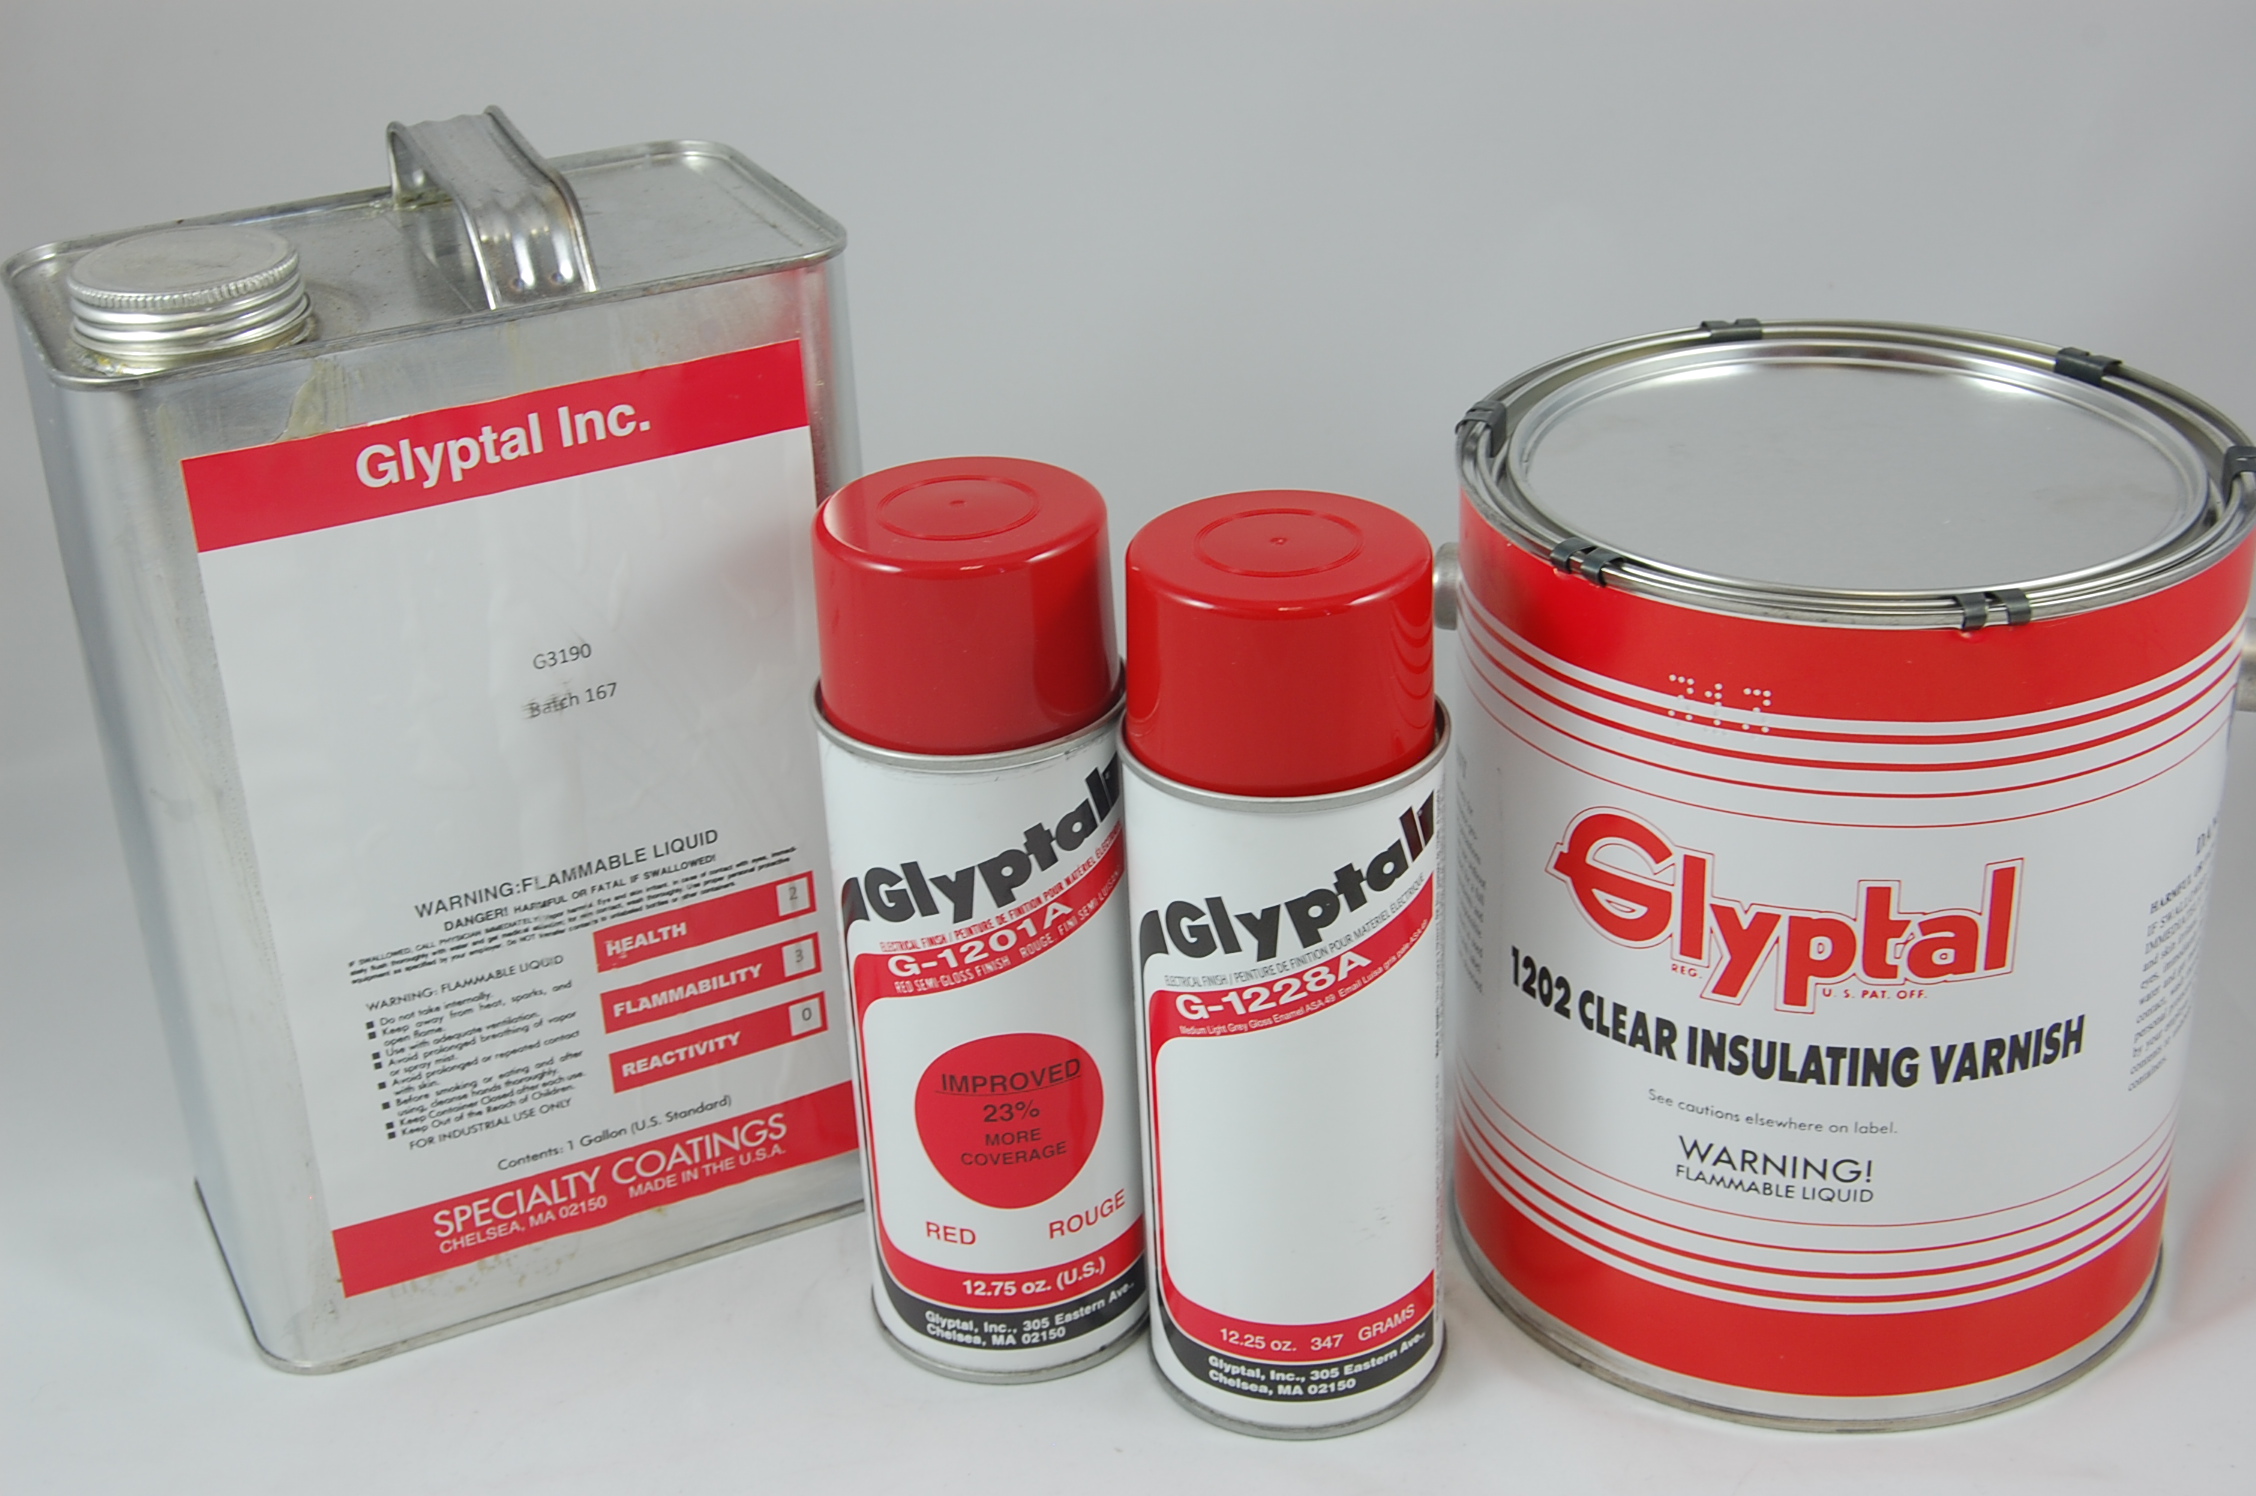 Glyptal 1202 Clear Air-Drying Insulating Varnish 130°C, clear, 1 GALLON can